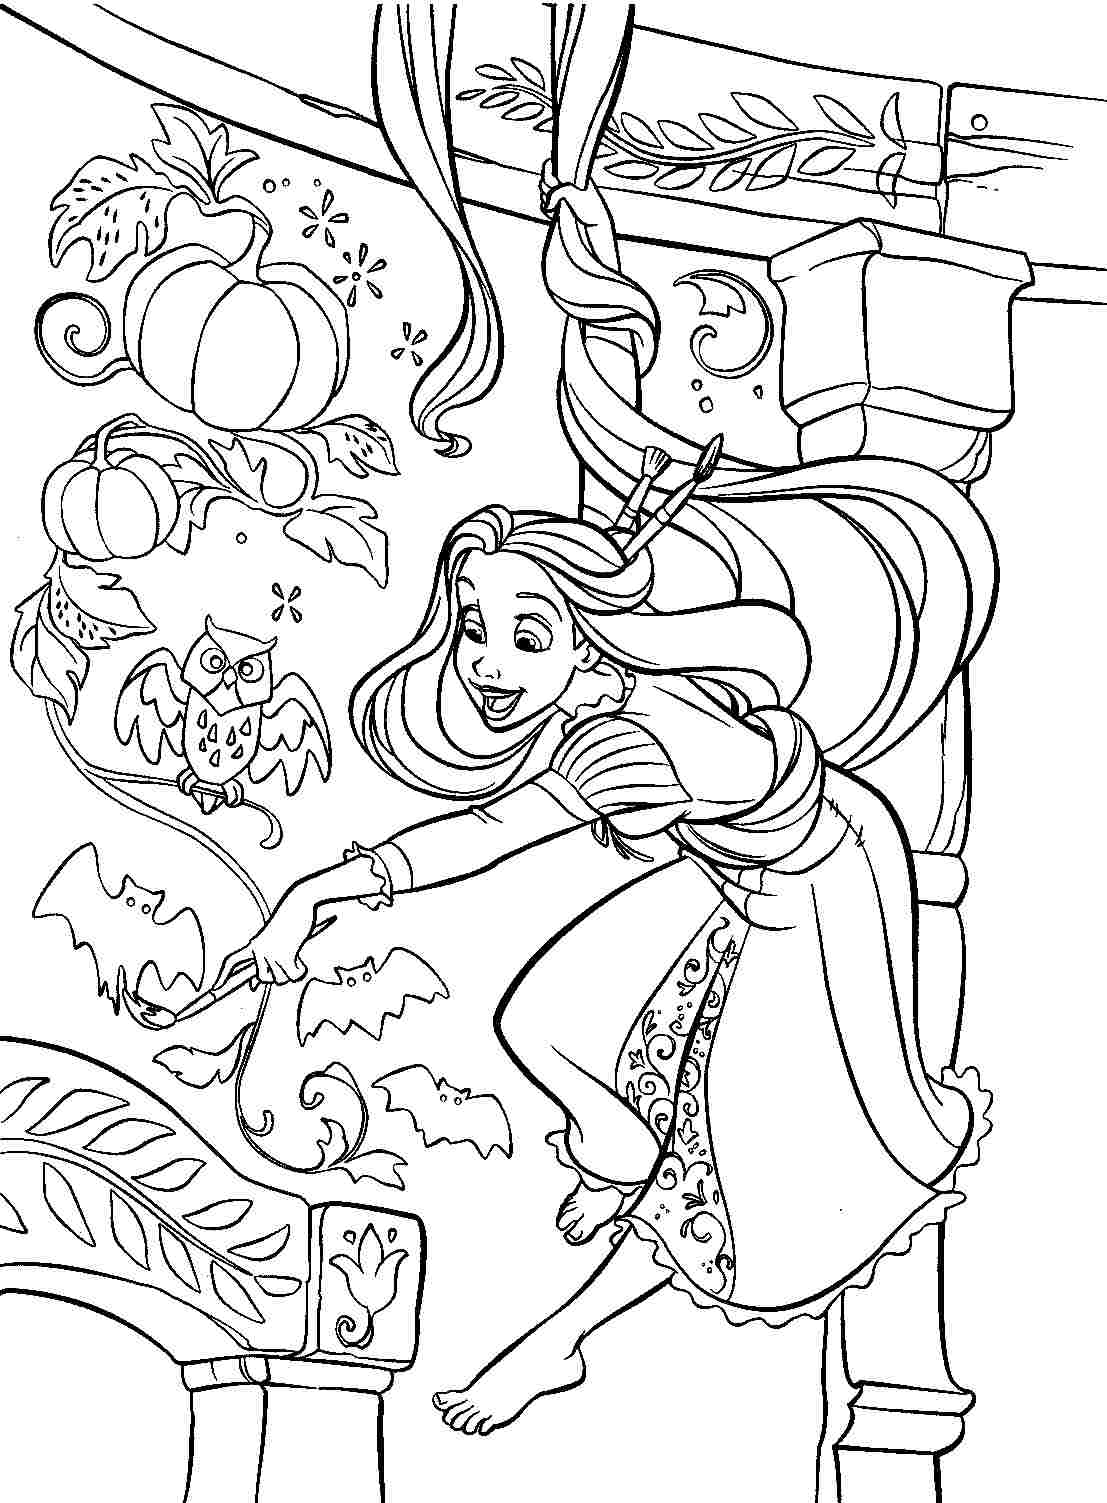 Coloring Pages For Adults Disney At GetColorings Free Printable 